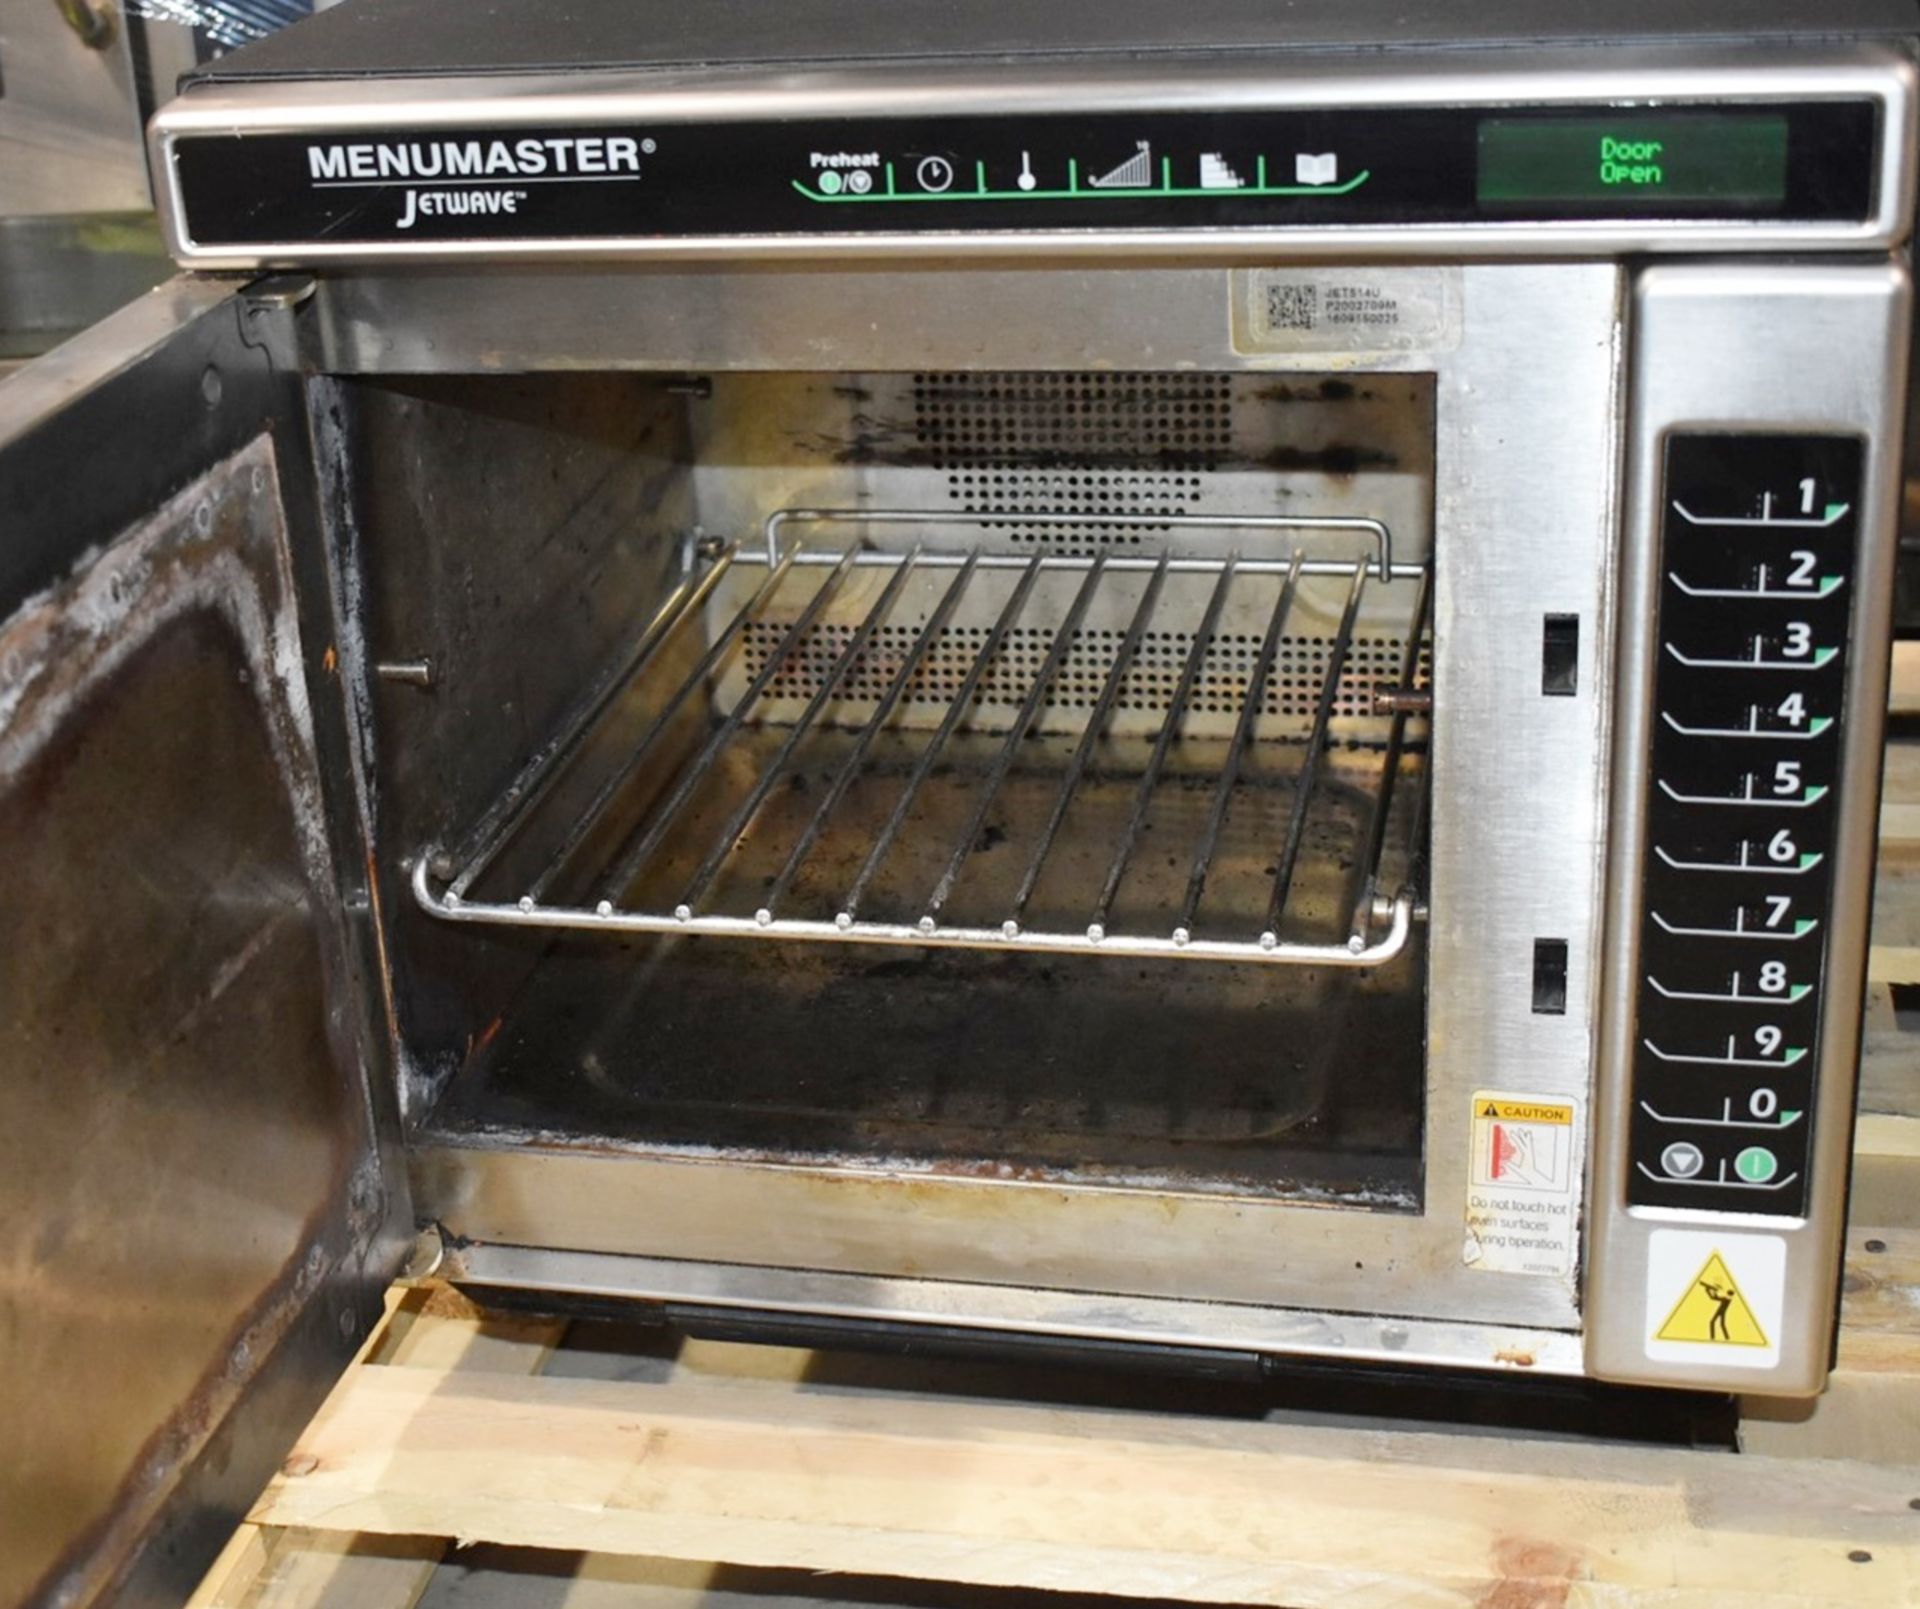 1 x Menumaster Jetwave JET514U High Speed Combination Microwave Oven - RRP £2,400 - Recently Removed - Image 2 of 8